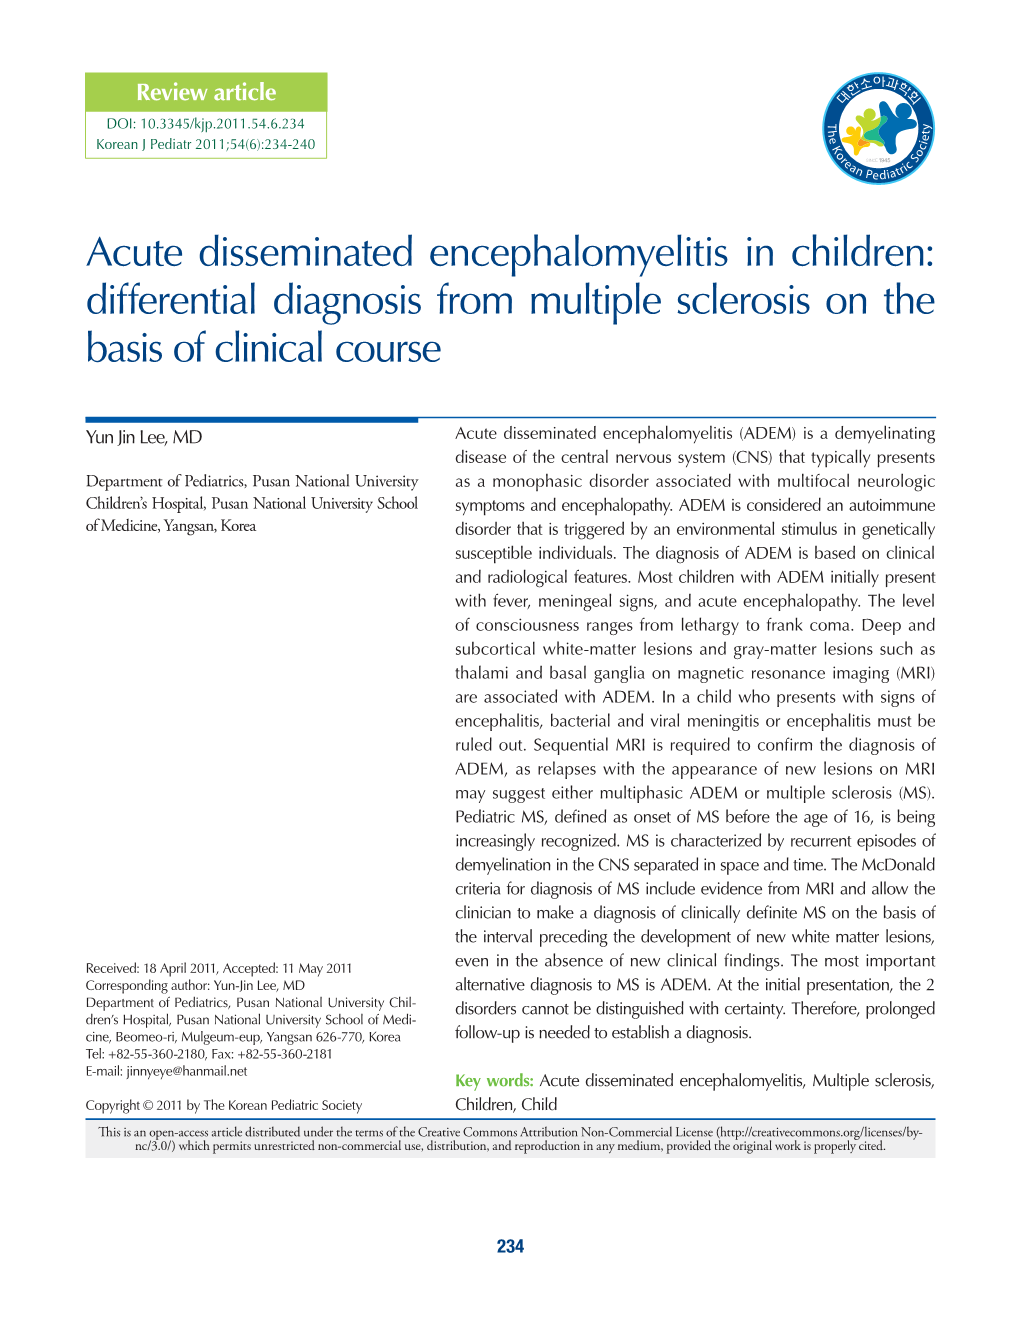 Acute Disseminated Encephalomyelitis in Children: Differential Diagnosis from Multiple Sclerosis on the Basis of Clinical Course